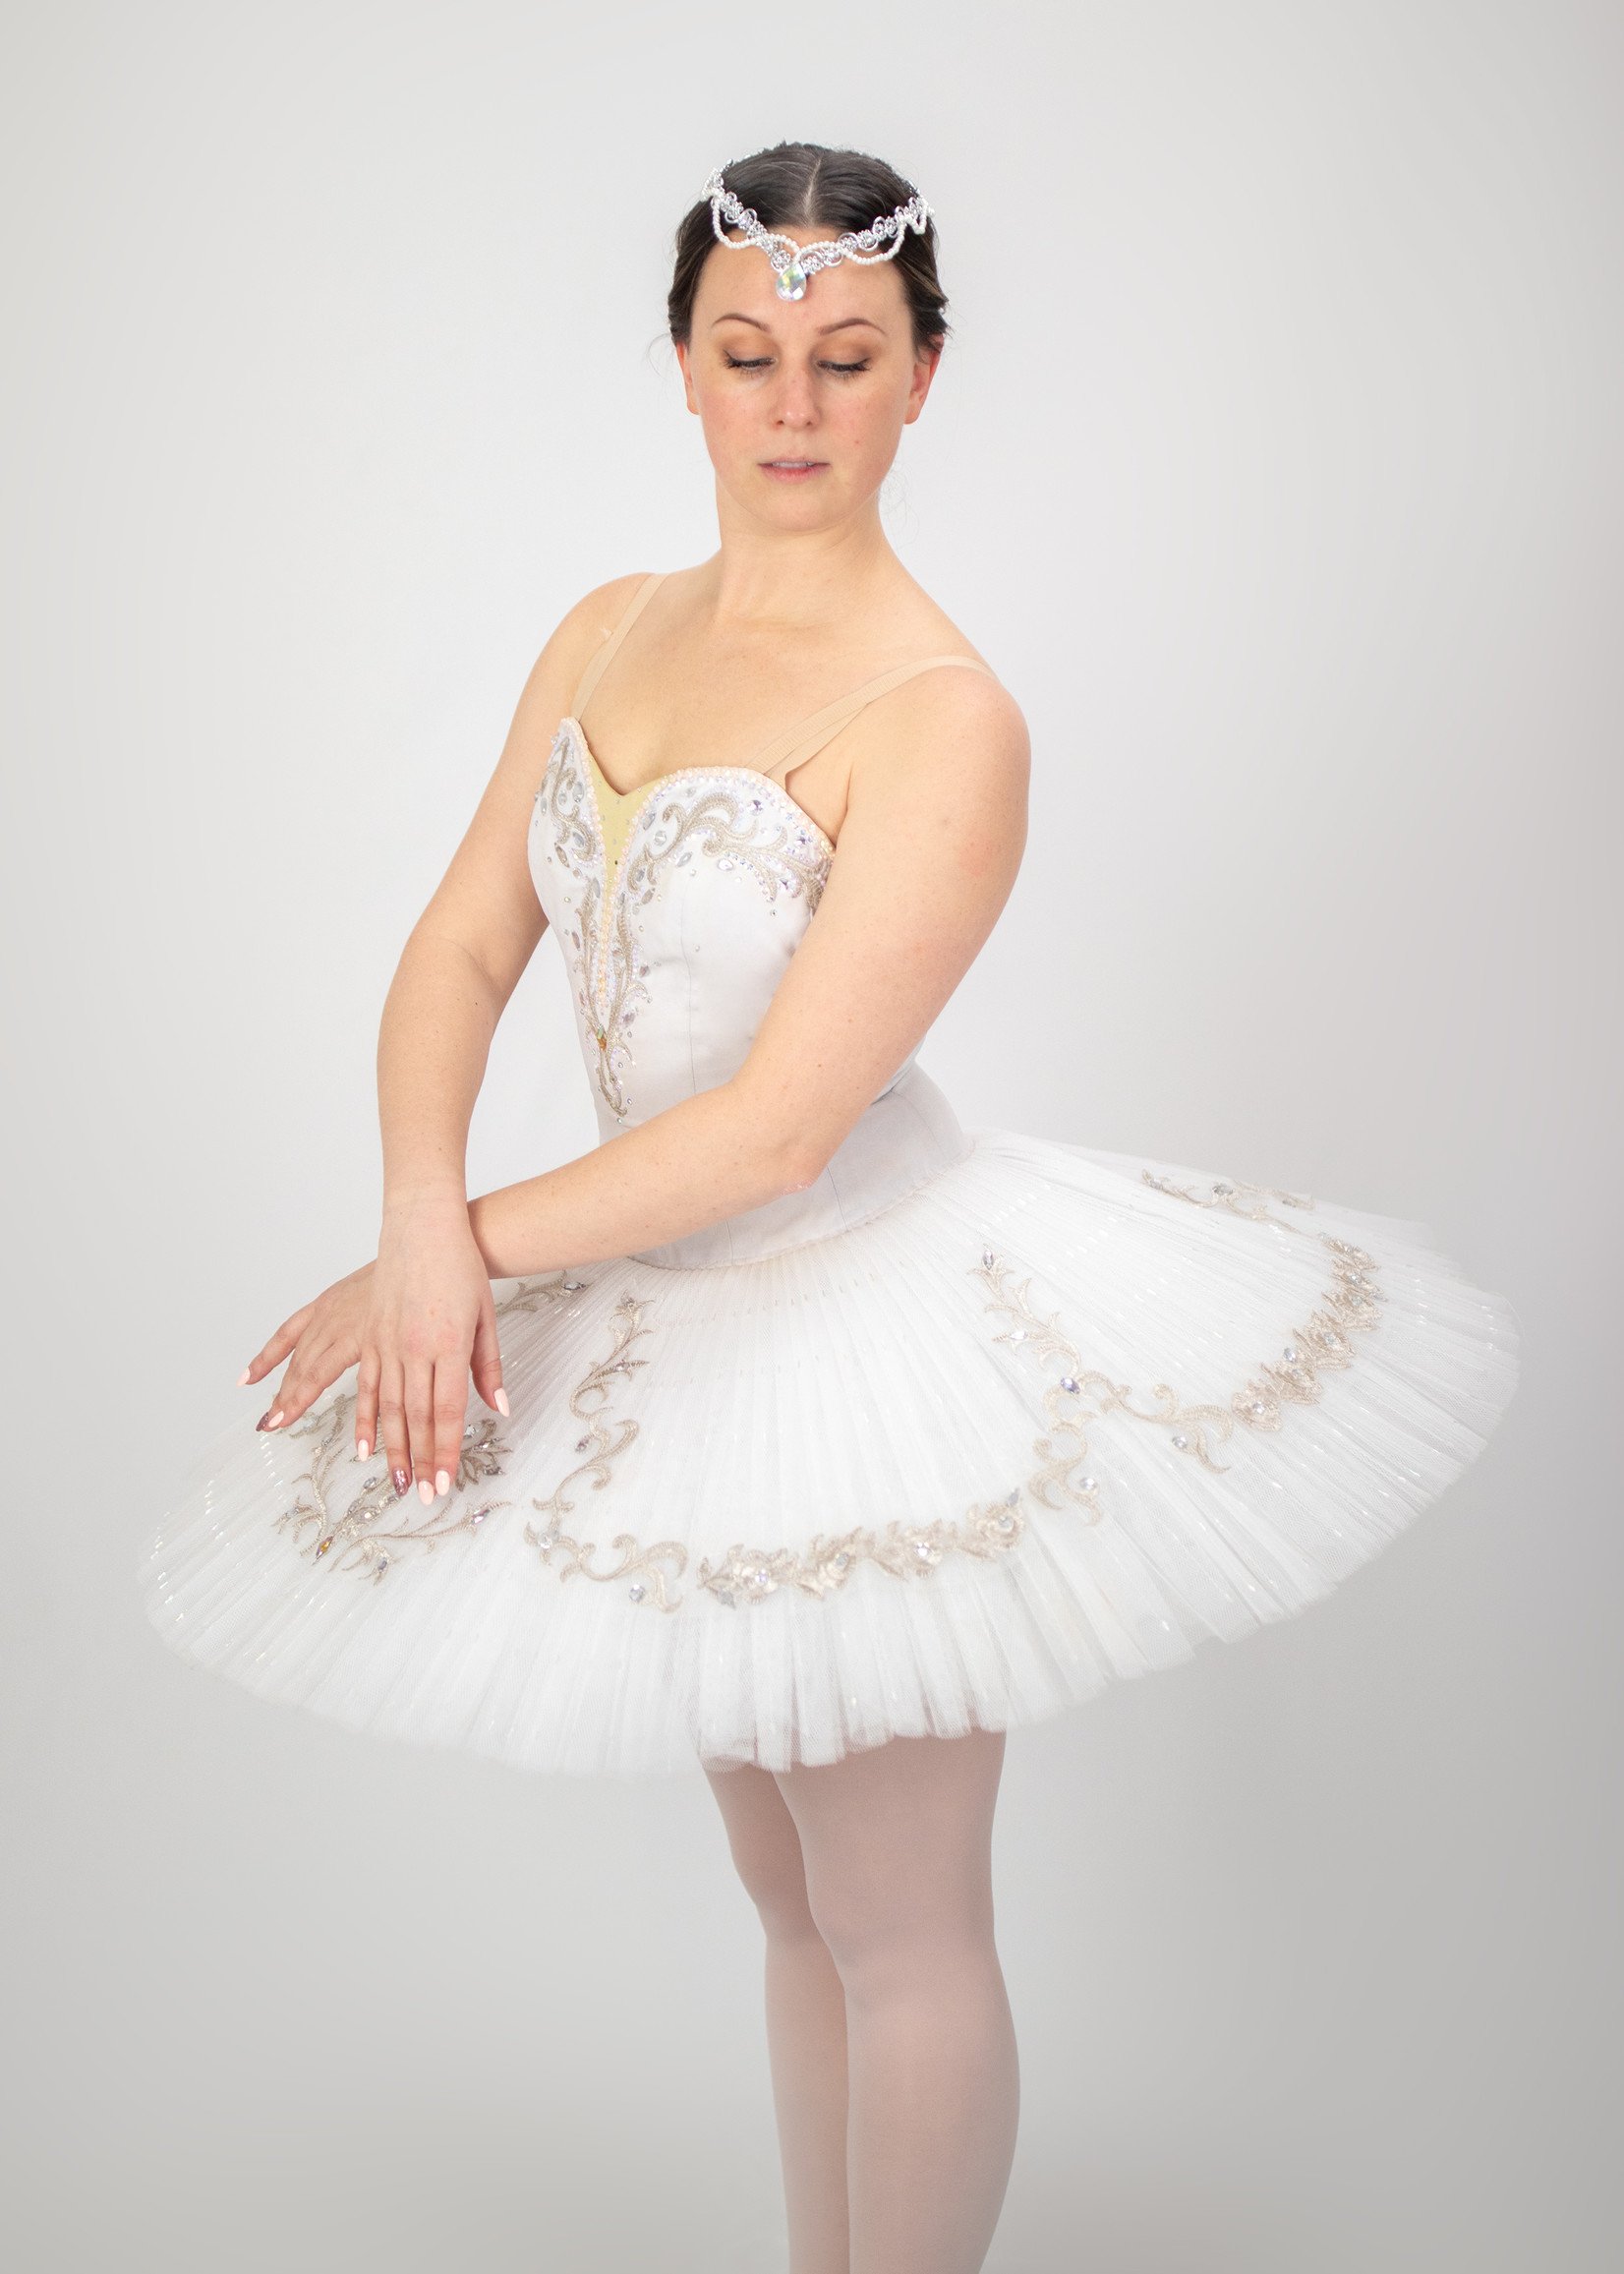 Long White Lyrical Dress from Capezio Hire Costume